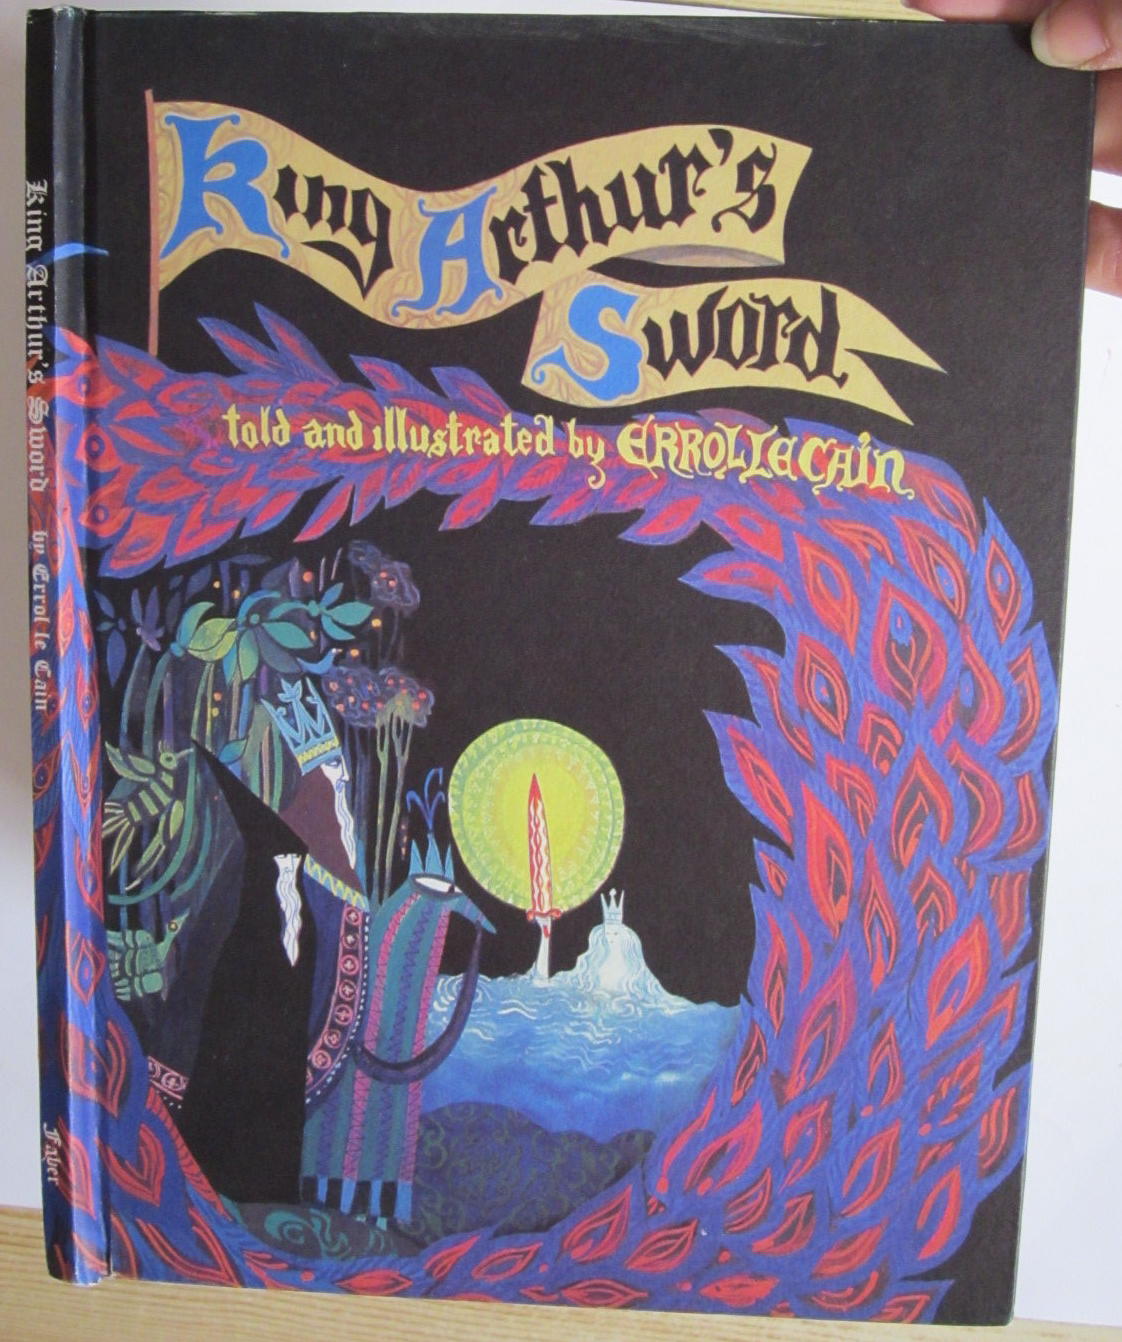 Photo of KING ARTHUR'S SWORD written by Le Cain, Errol illustrated by Le Cain, Errol published by Faber & Faber (STOCK CODE: 1307925)  for sale by Stella & Rose's Books